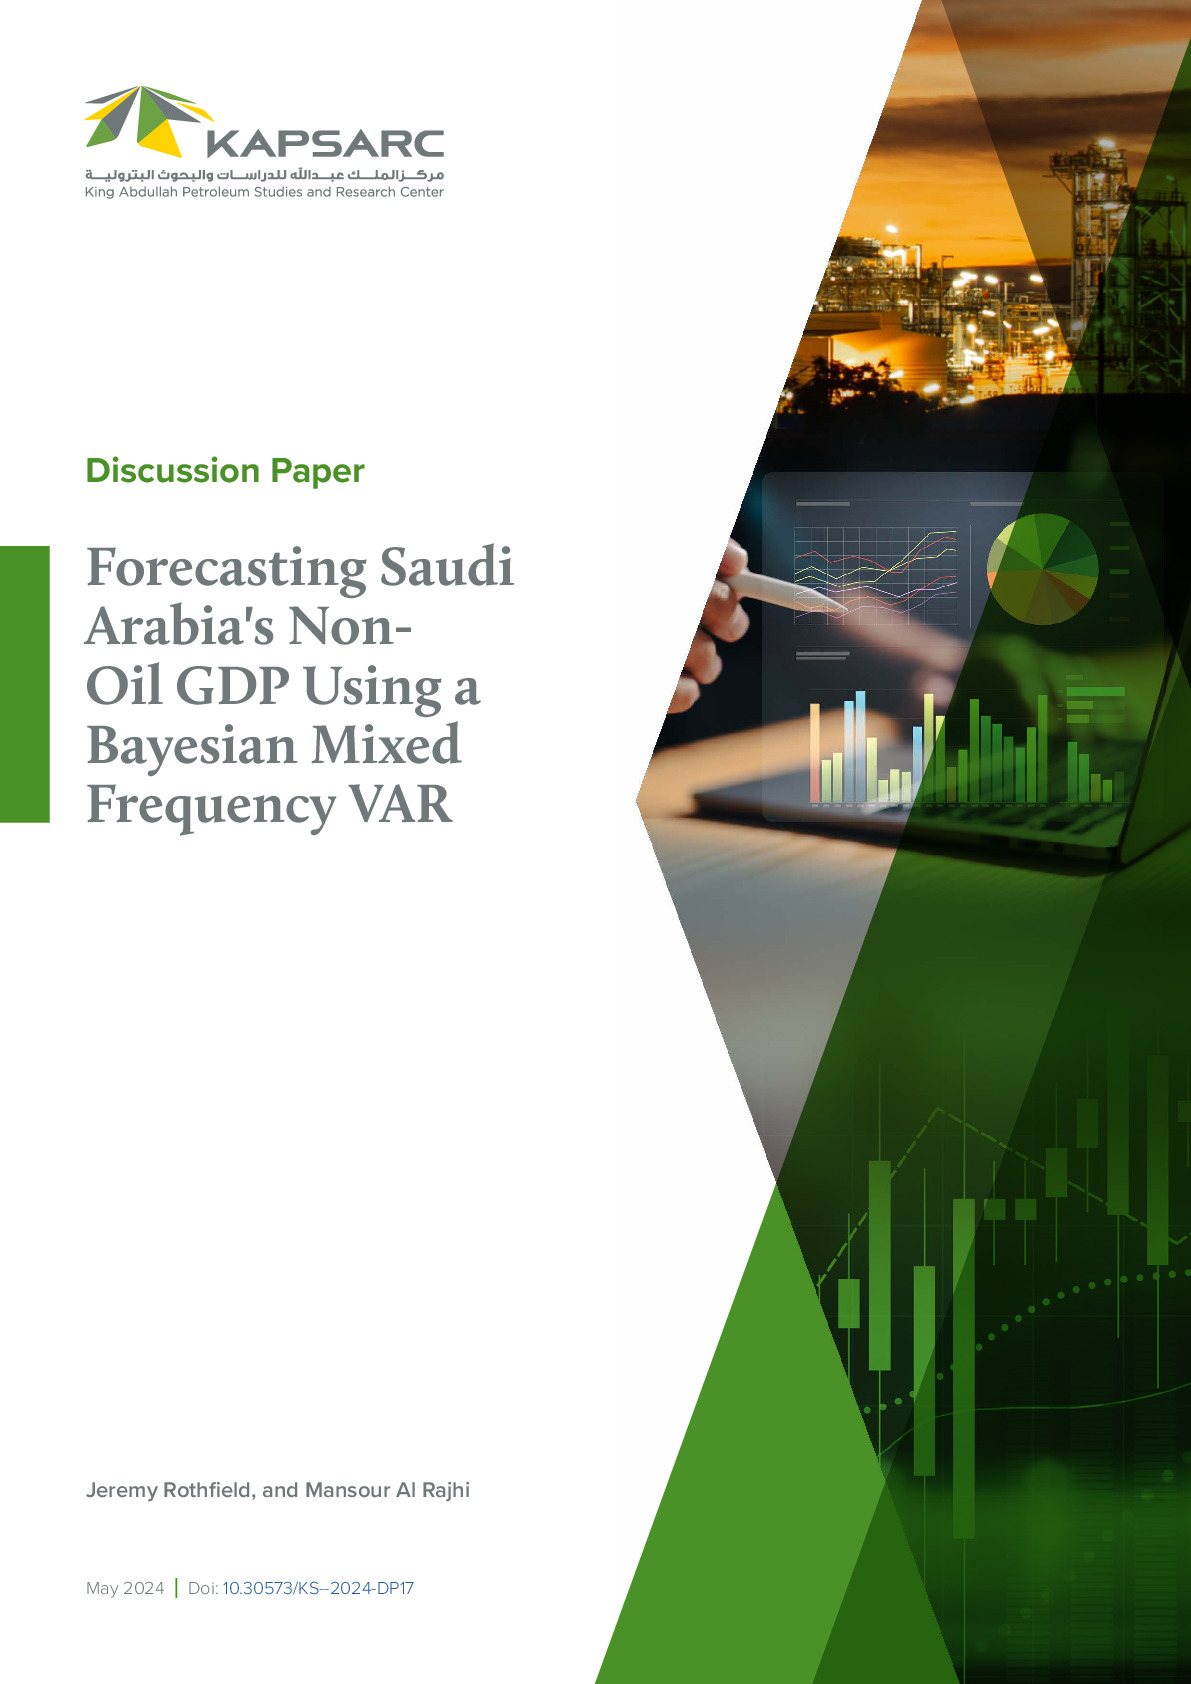 Forecasting Saudi Arabia’s Non-Oil GDP Using a Bayesian Mixed Frequency VAR